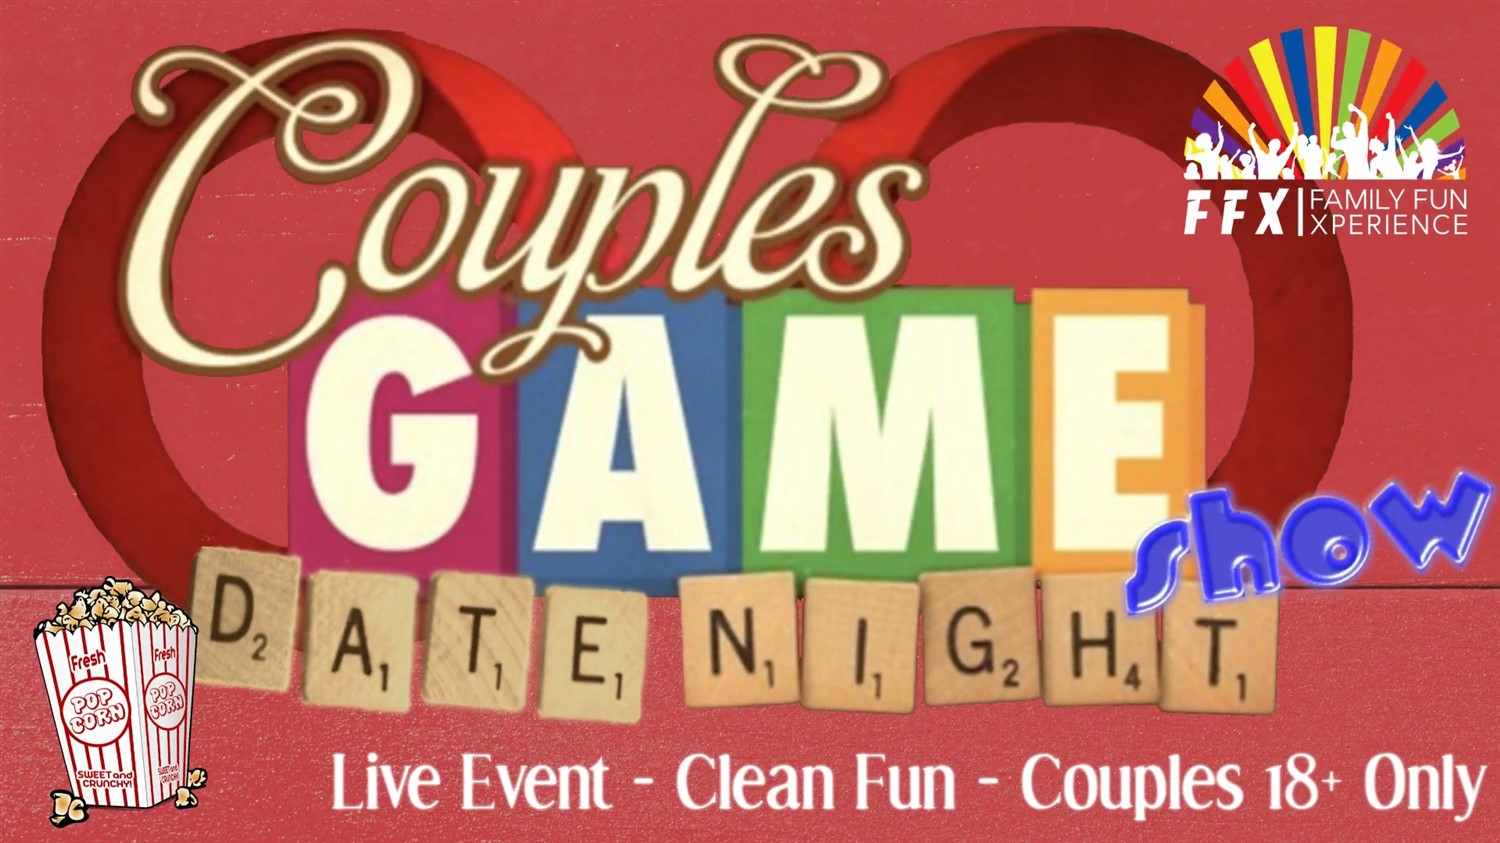 Couples Date Night Game Show! Live - Couples Only - FUN! on Jul 28, 19:00@FFX Theatre - Pick a seat, Buy tickets and Get information on Family Fun Xperience tickets.ffxshow.org